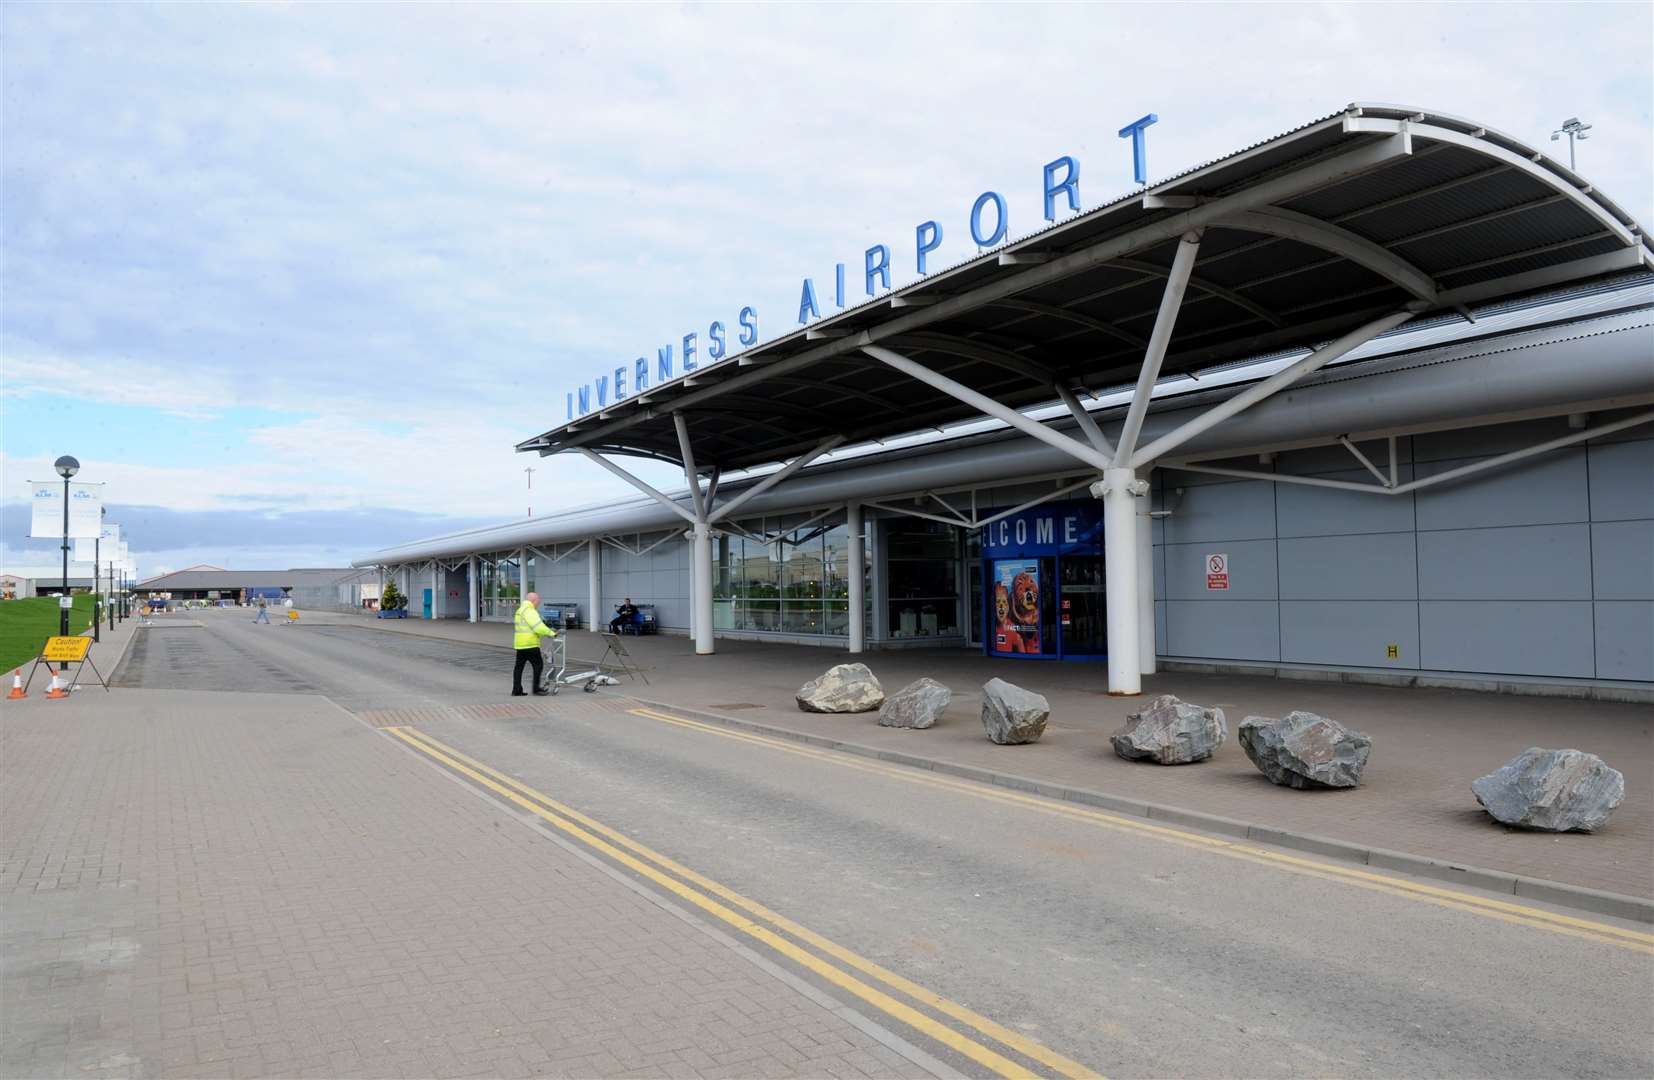 Hial, Inverness Airport which will eventually be connected by rail.